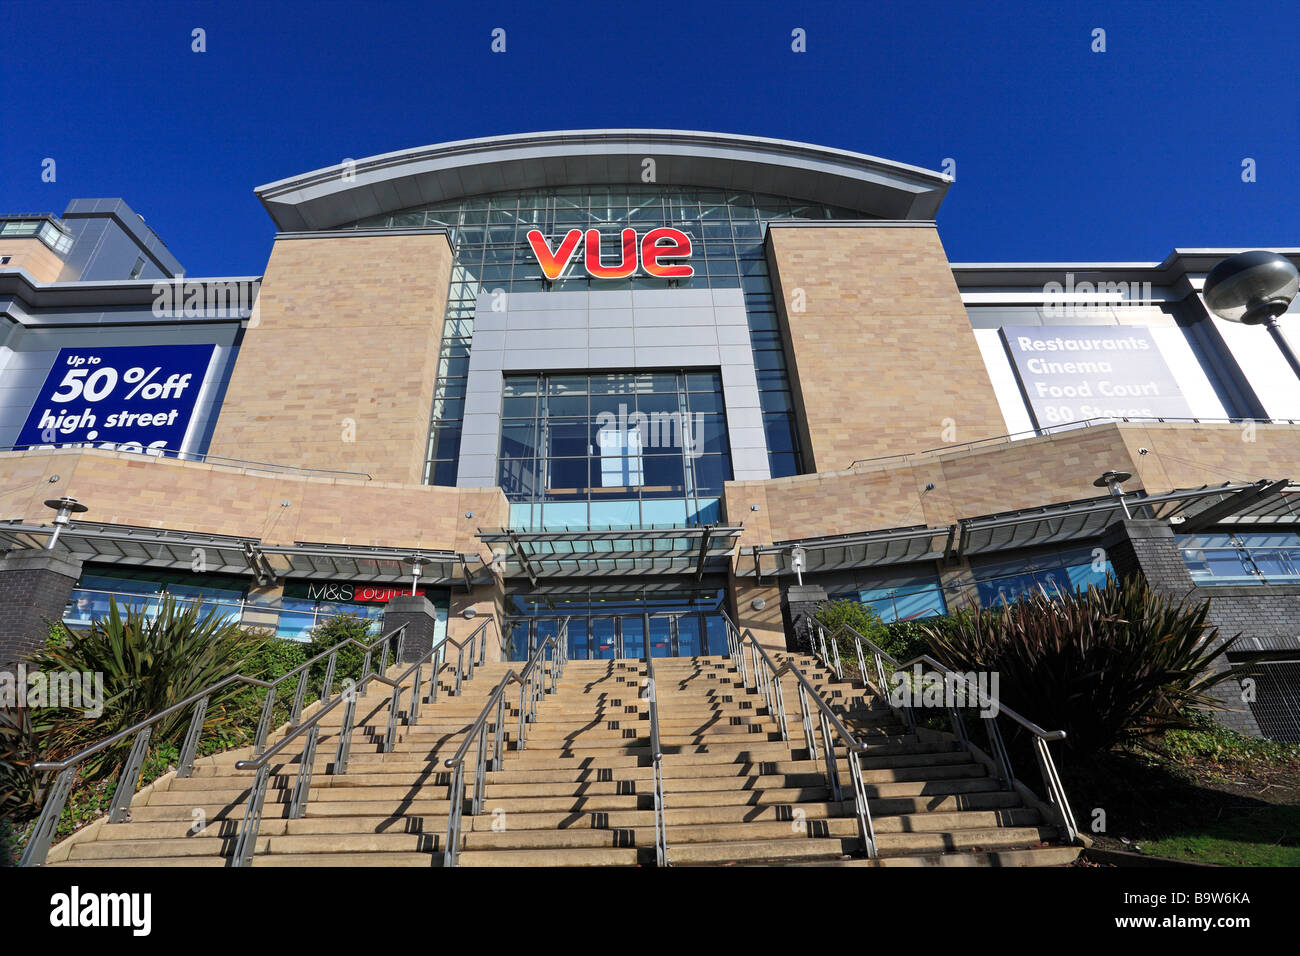 Vue Cinema ingresso, Lowry Outlet Mall, Salford Quays, Manchester, Lancashire, Inghilterra, Regno Unito. Foto Stock